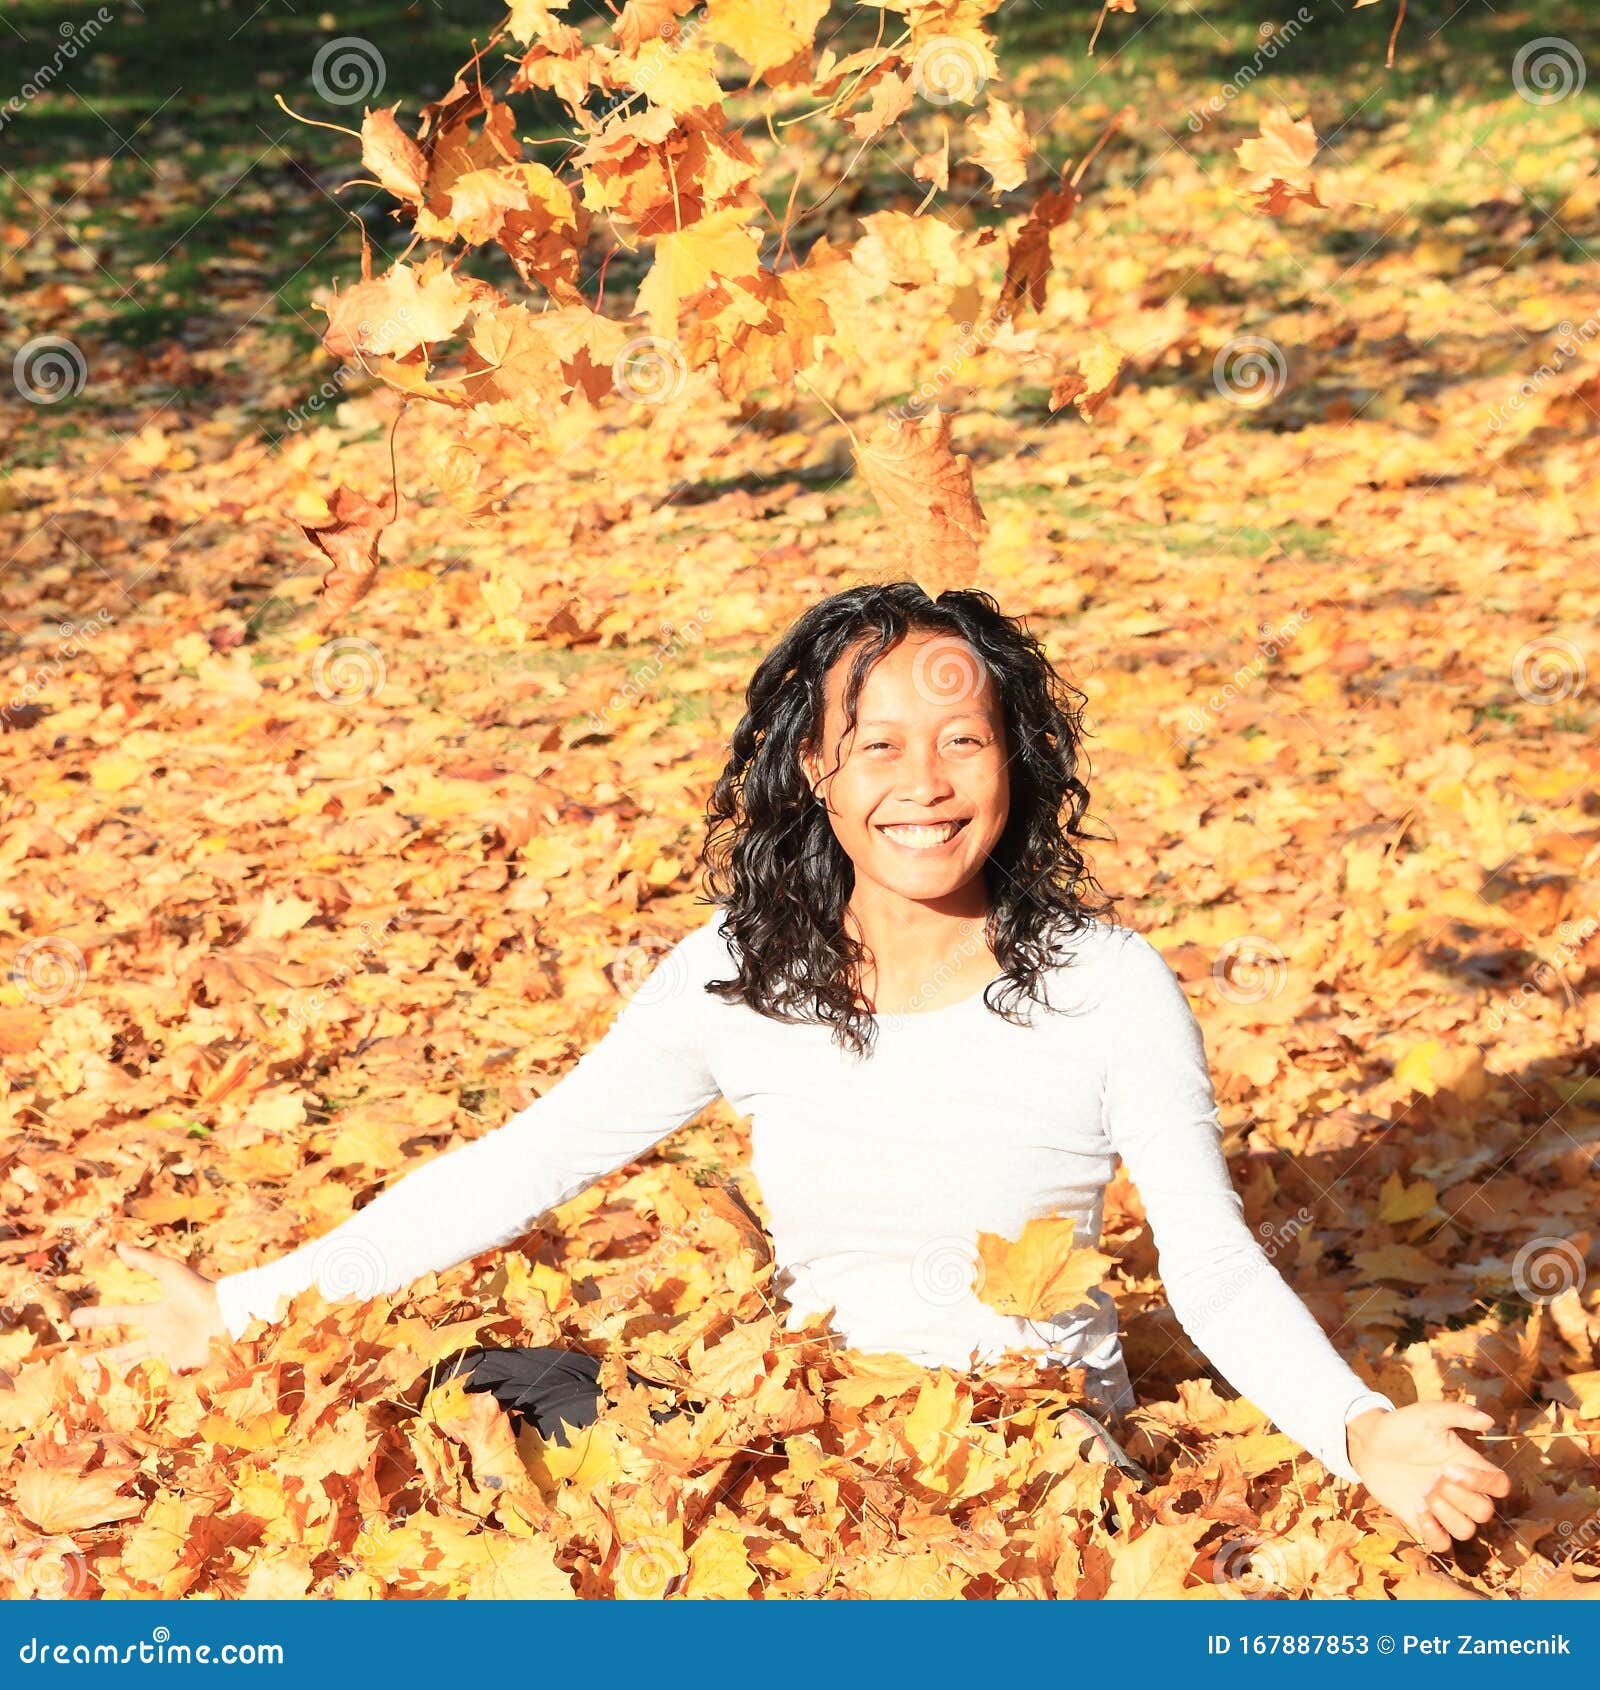 Smiling Tropical Girl Under Falling Yellow Leaves Stock Image - Image ...